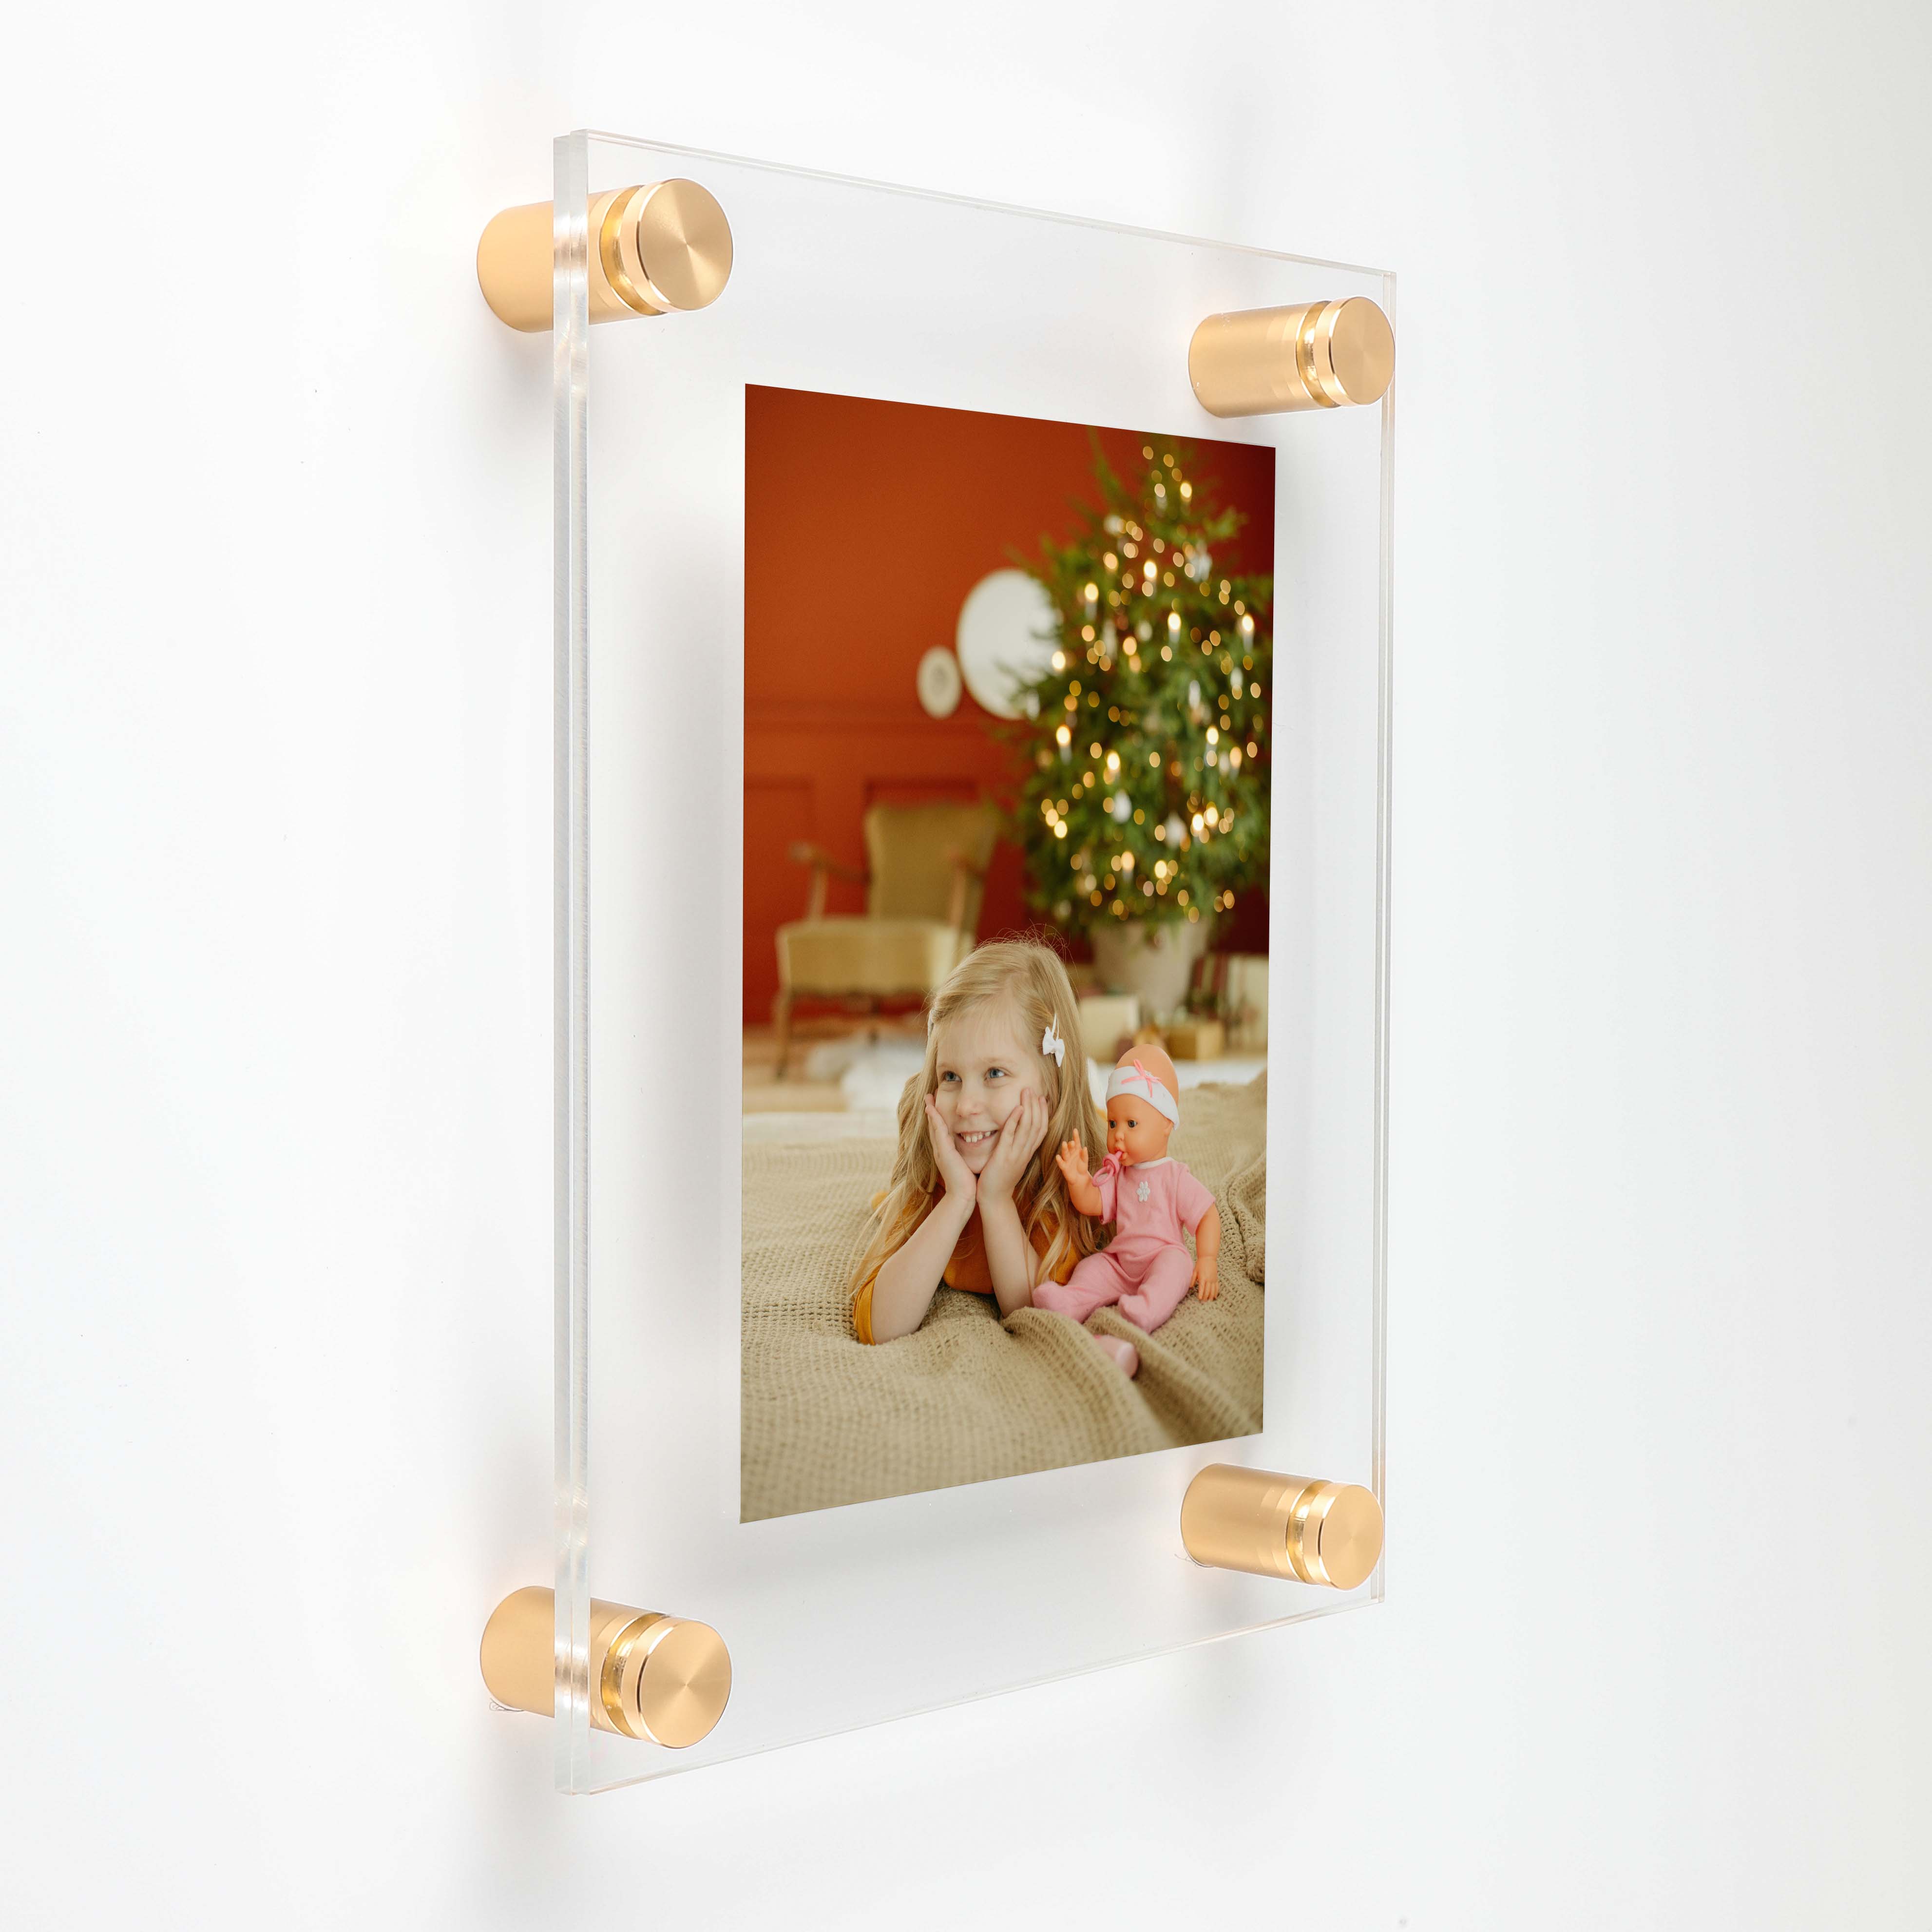 (2) 27'' x 39'' Clear Acrylics , Pre-Drilled With Polished Edges (Thick 3/16'' each), Wall Frame with (6) 3/4'' x 3/4'' Champagne Anodized Aluminum Standoffs includes Screws and Anchors